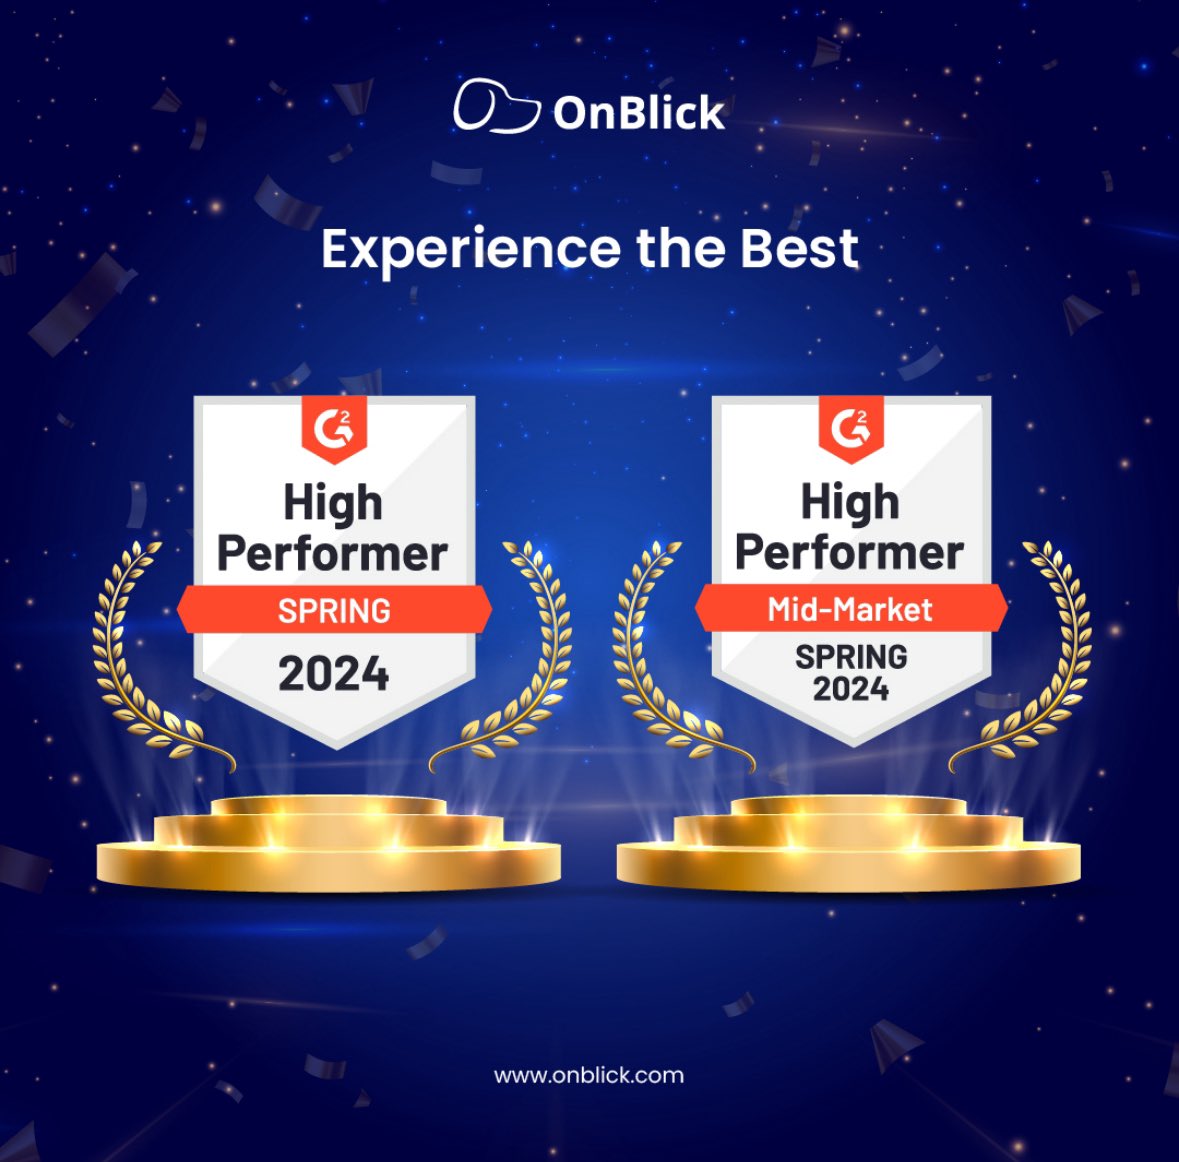 Exciting news! OnBlick has been named a High Performer in the HR compliance category by G2  in their Spring Awards.
 
OnBlick is grateful to its dedicated team and valued users for making this achievement possible.

#onblick #g2 #highperformer #midmarket #spring #hr #hrcompliance